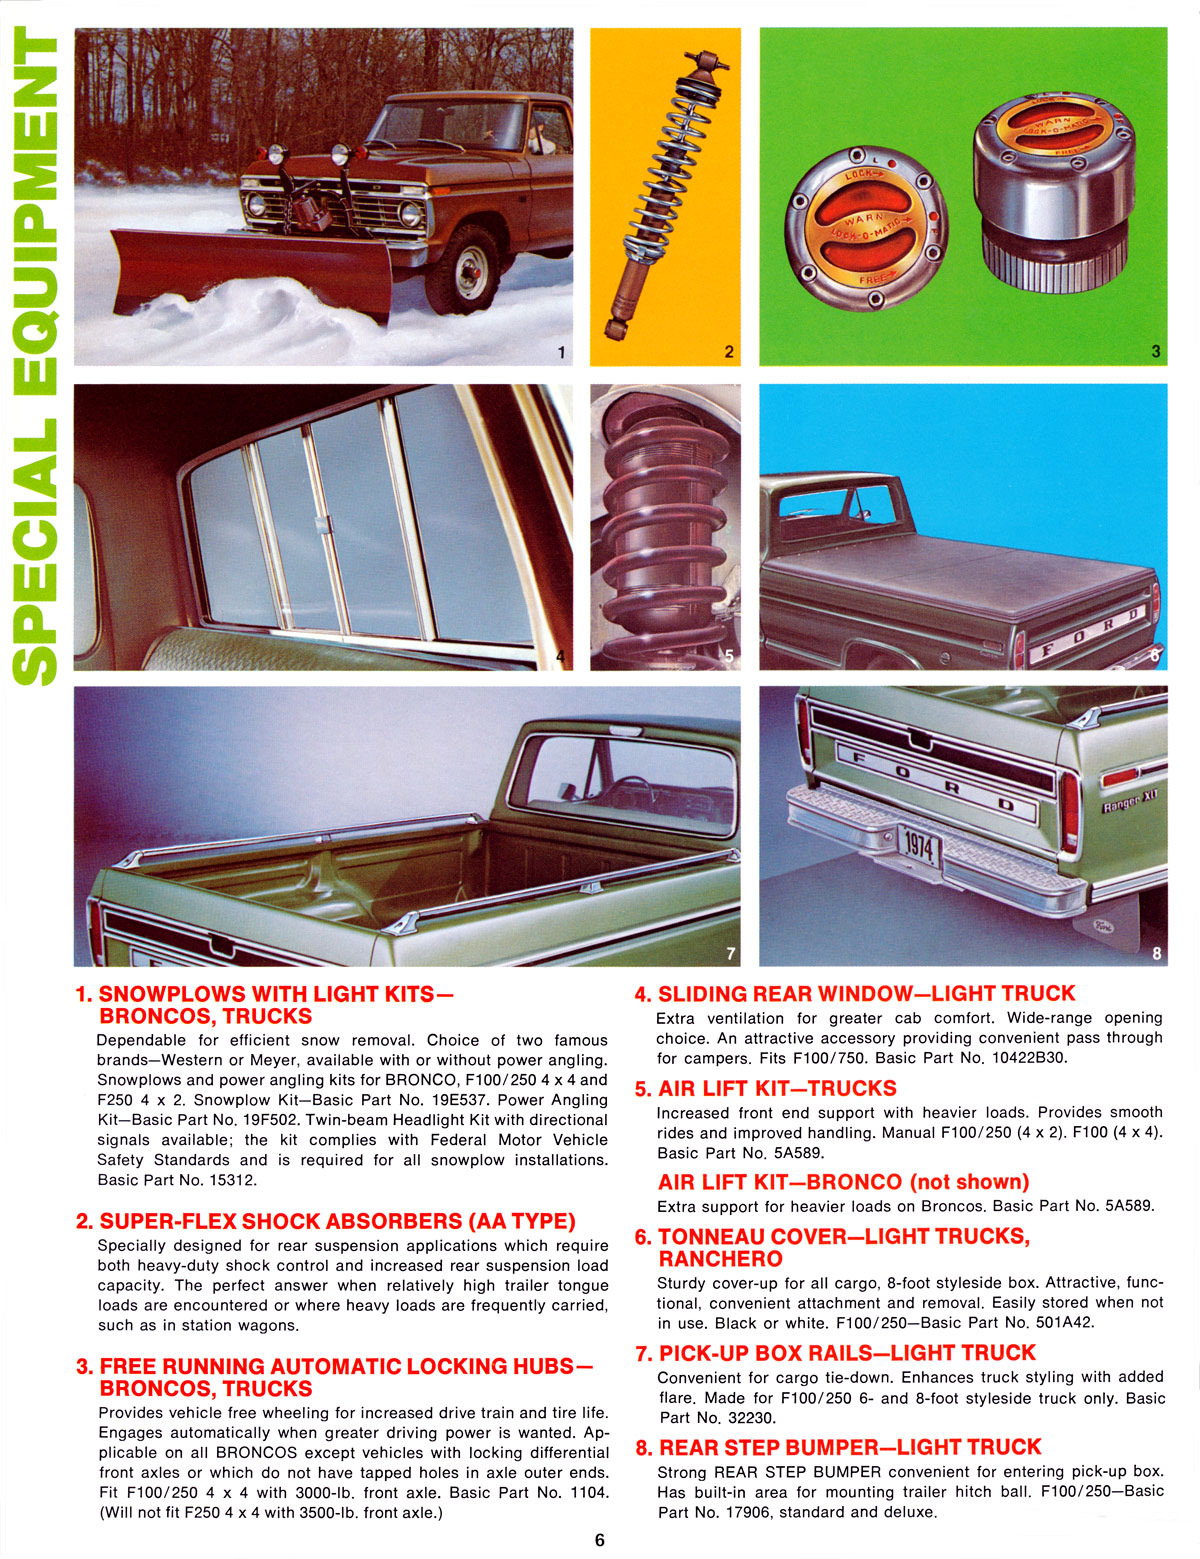 1974_Ford_Triuck_Accessories-06